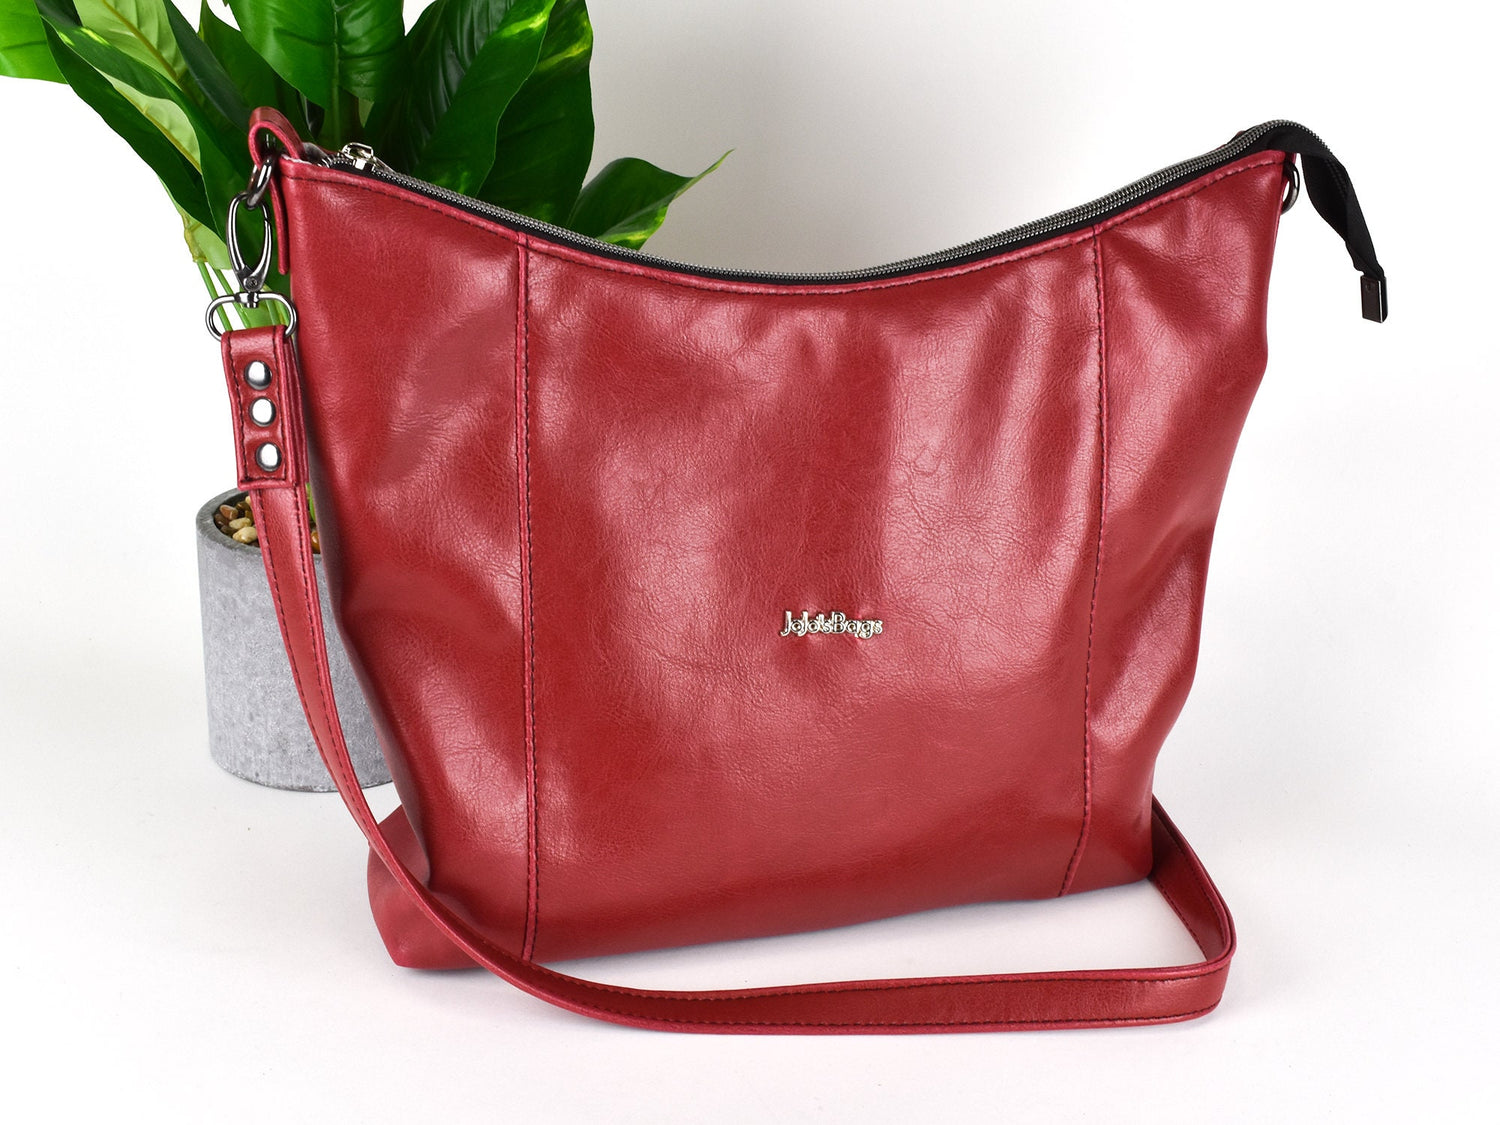 Handmade Womens Leather Crossbody Bags Purse Shoulder Bag for Women, Red